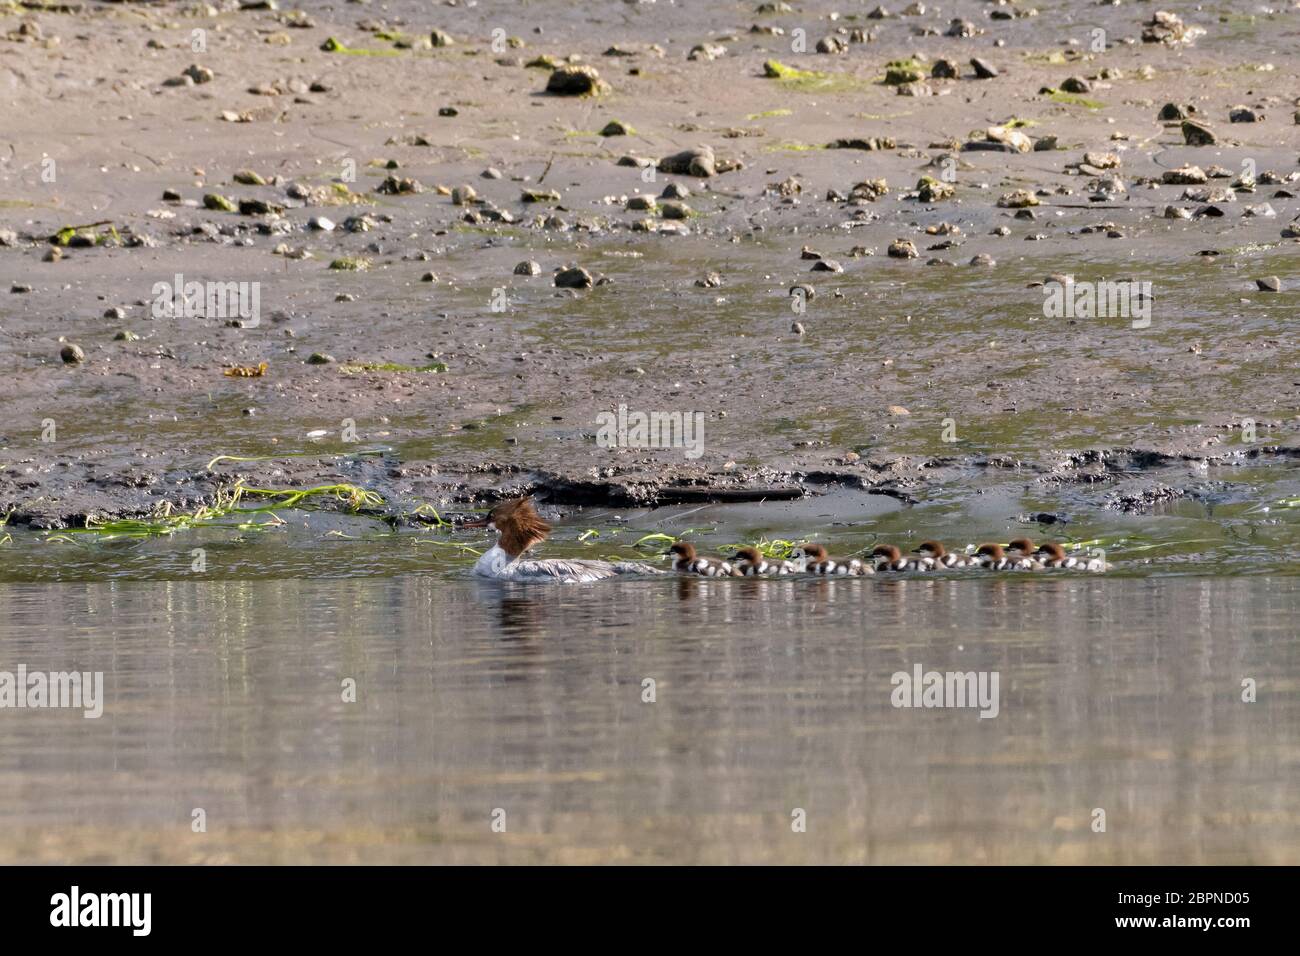 Merganser duck with 9 chicks swimming by the shore, Khutzeymateen Inlet, BC Stock Photo